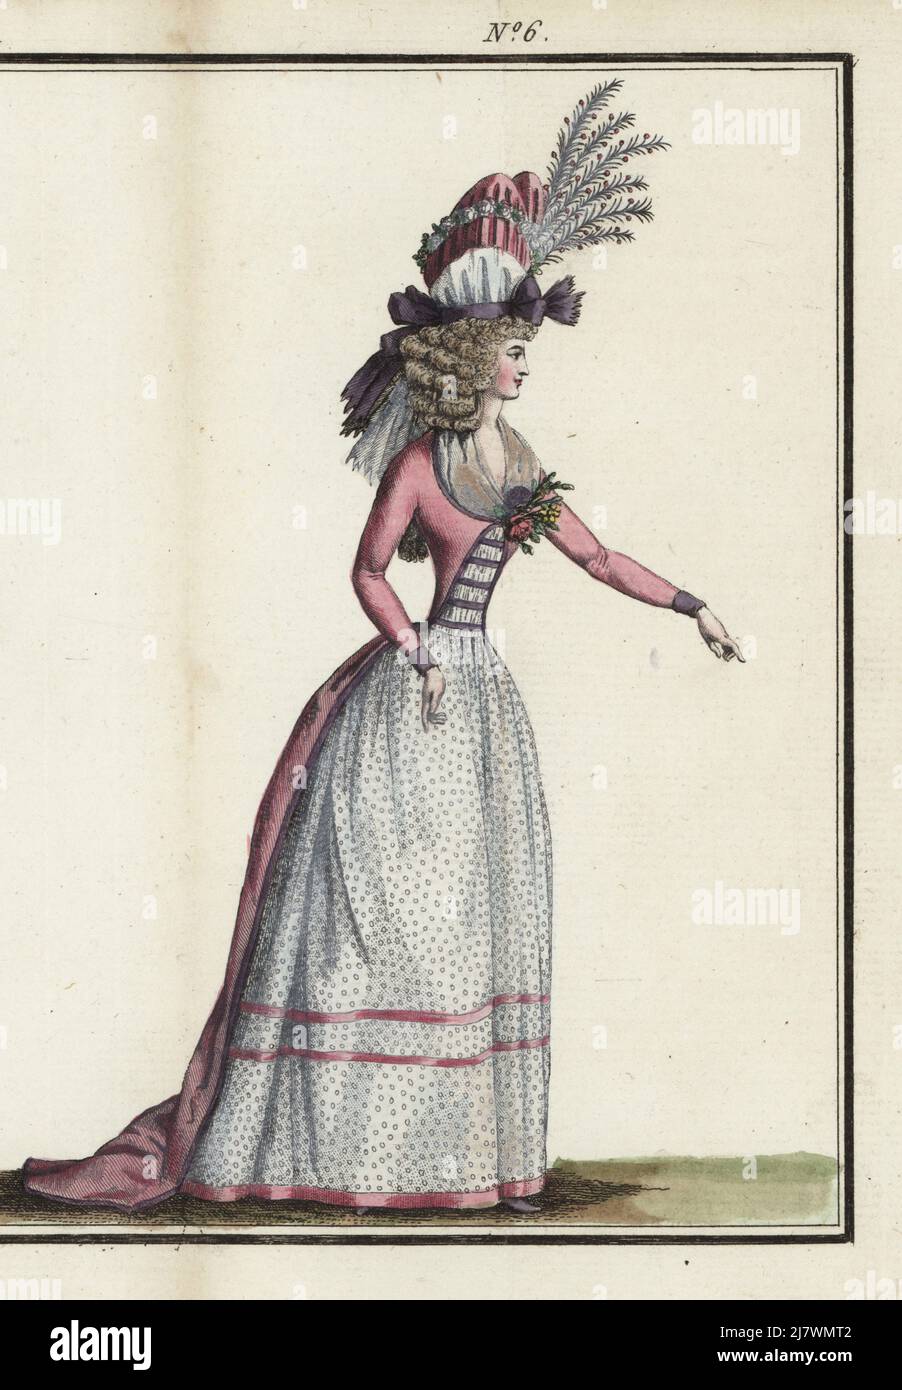 Fashionable woman in pleated bonnet with garland of flowers and aigrette, hair in chignon and small curls, gauze fichu, pink satin robe, gauze piece and linen petticoat decorated with violet ribbons, violet slippers. Handcoloured copperplate engraving from Jean-Antoine le Brun or Lebrun-Tossa’s Journal de la Mode et du Gout, previously Cabinet des Modes, Chez Buisson, Paris, and Joseph le Boffe, London, 3me Cahier, 15 March 1790. Stock Photo